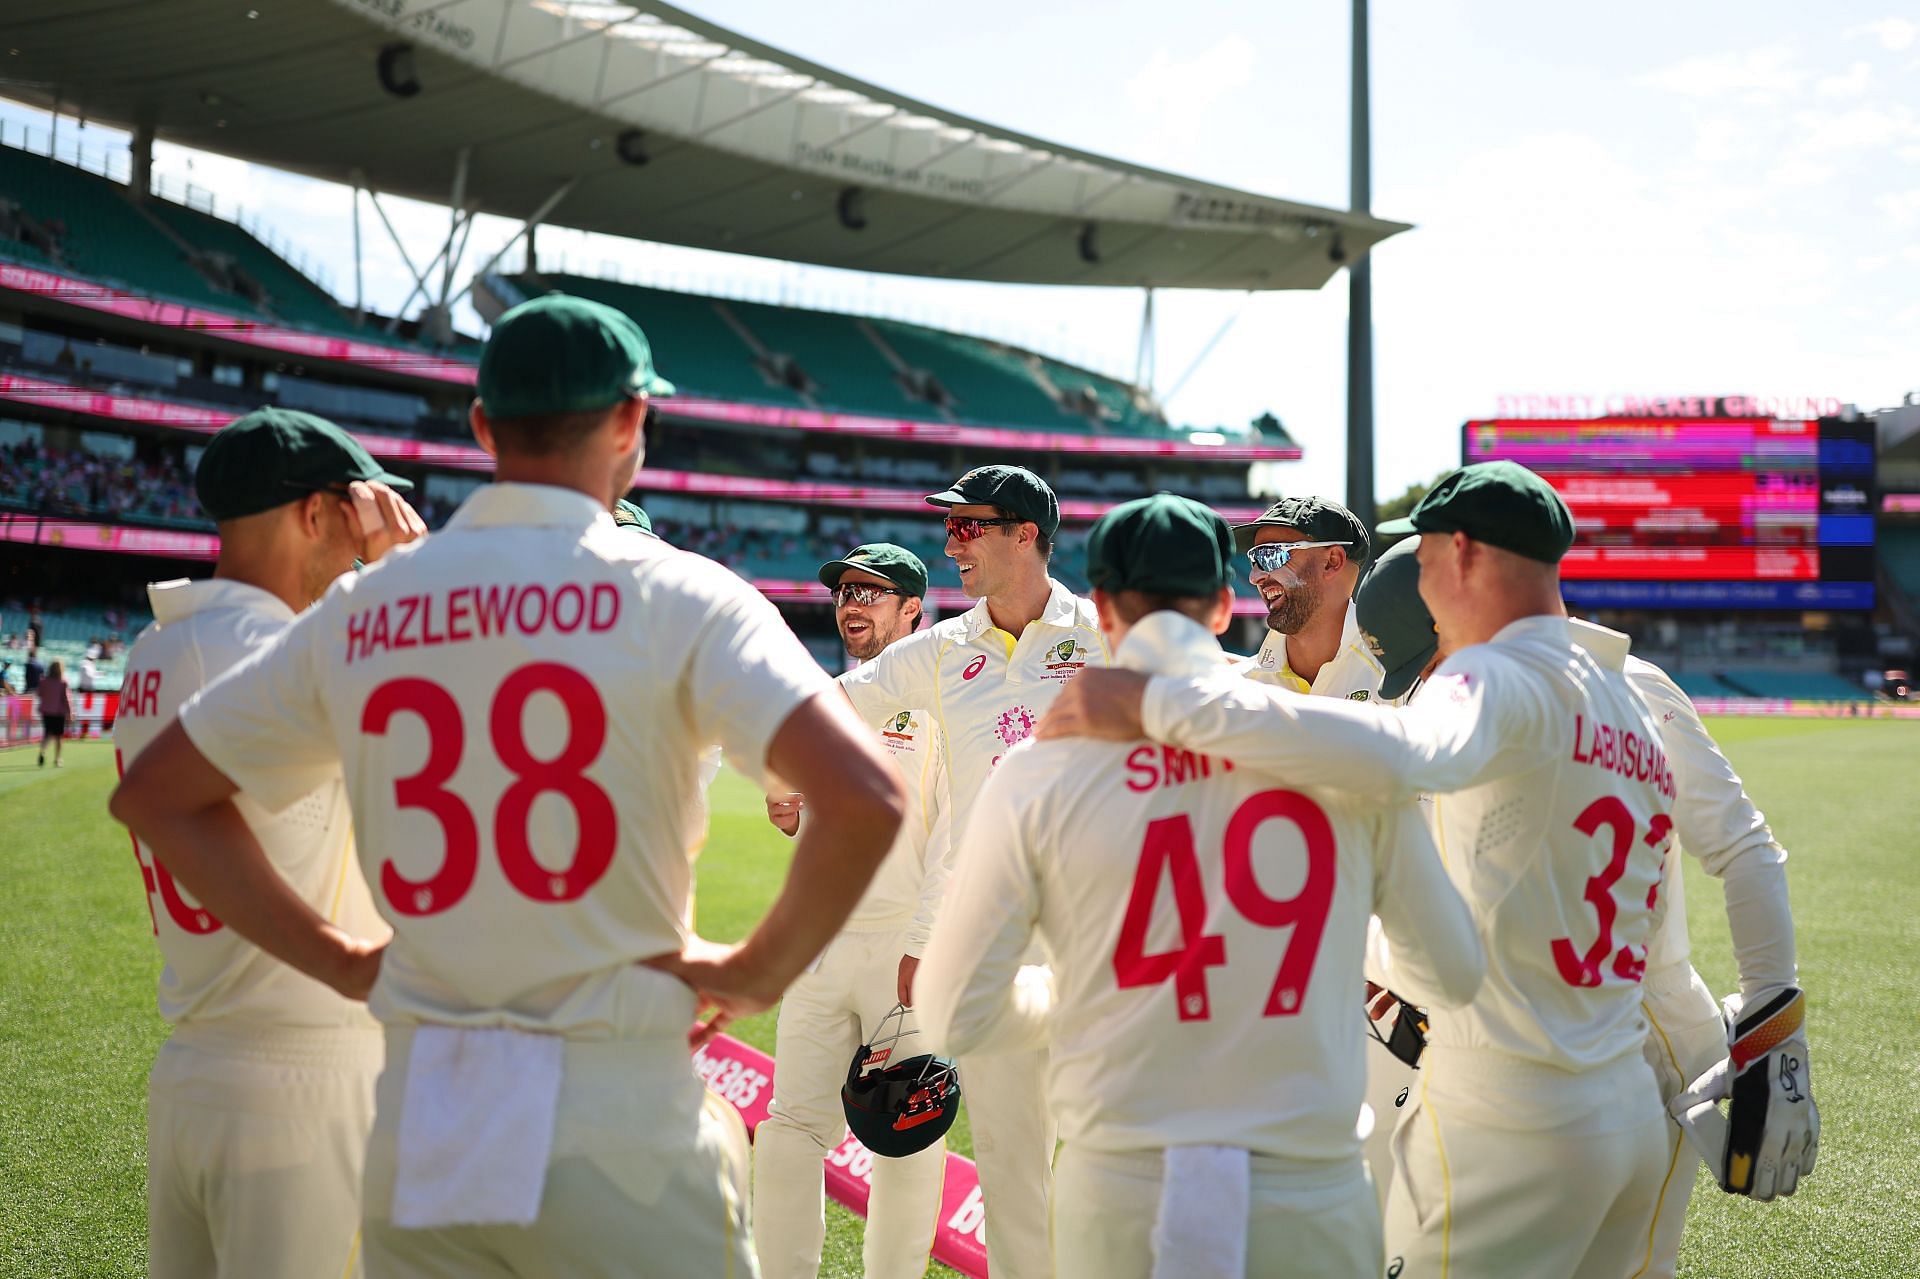 Australia return to the top of the ICC Test rankings following India's brief stay